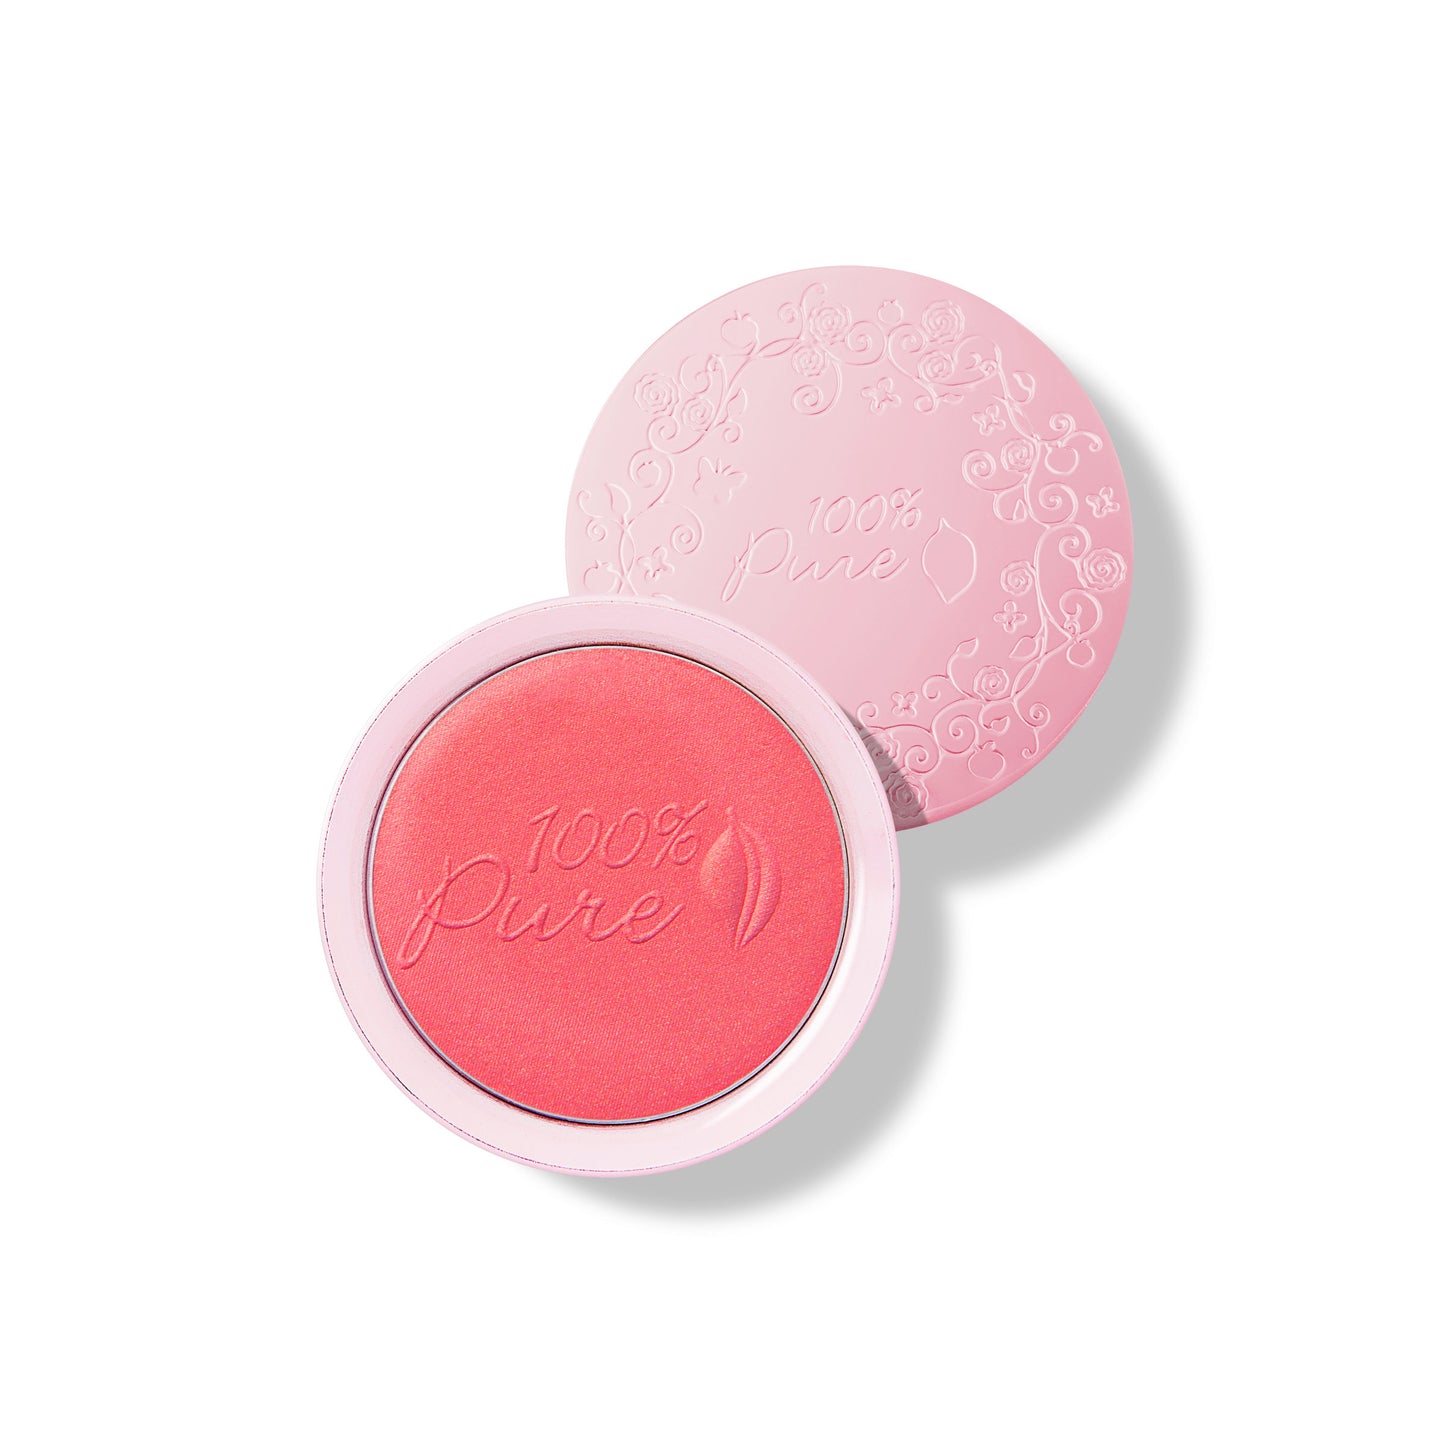 100% PURE Fruit Pigmented Blush peppermint candy